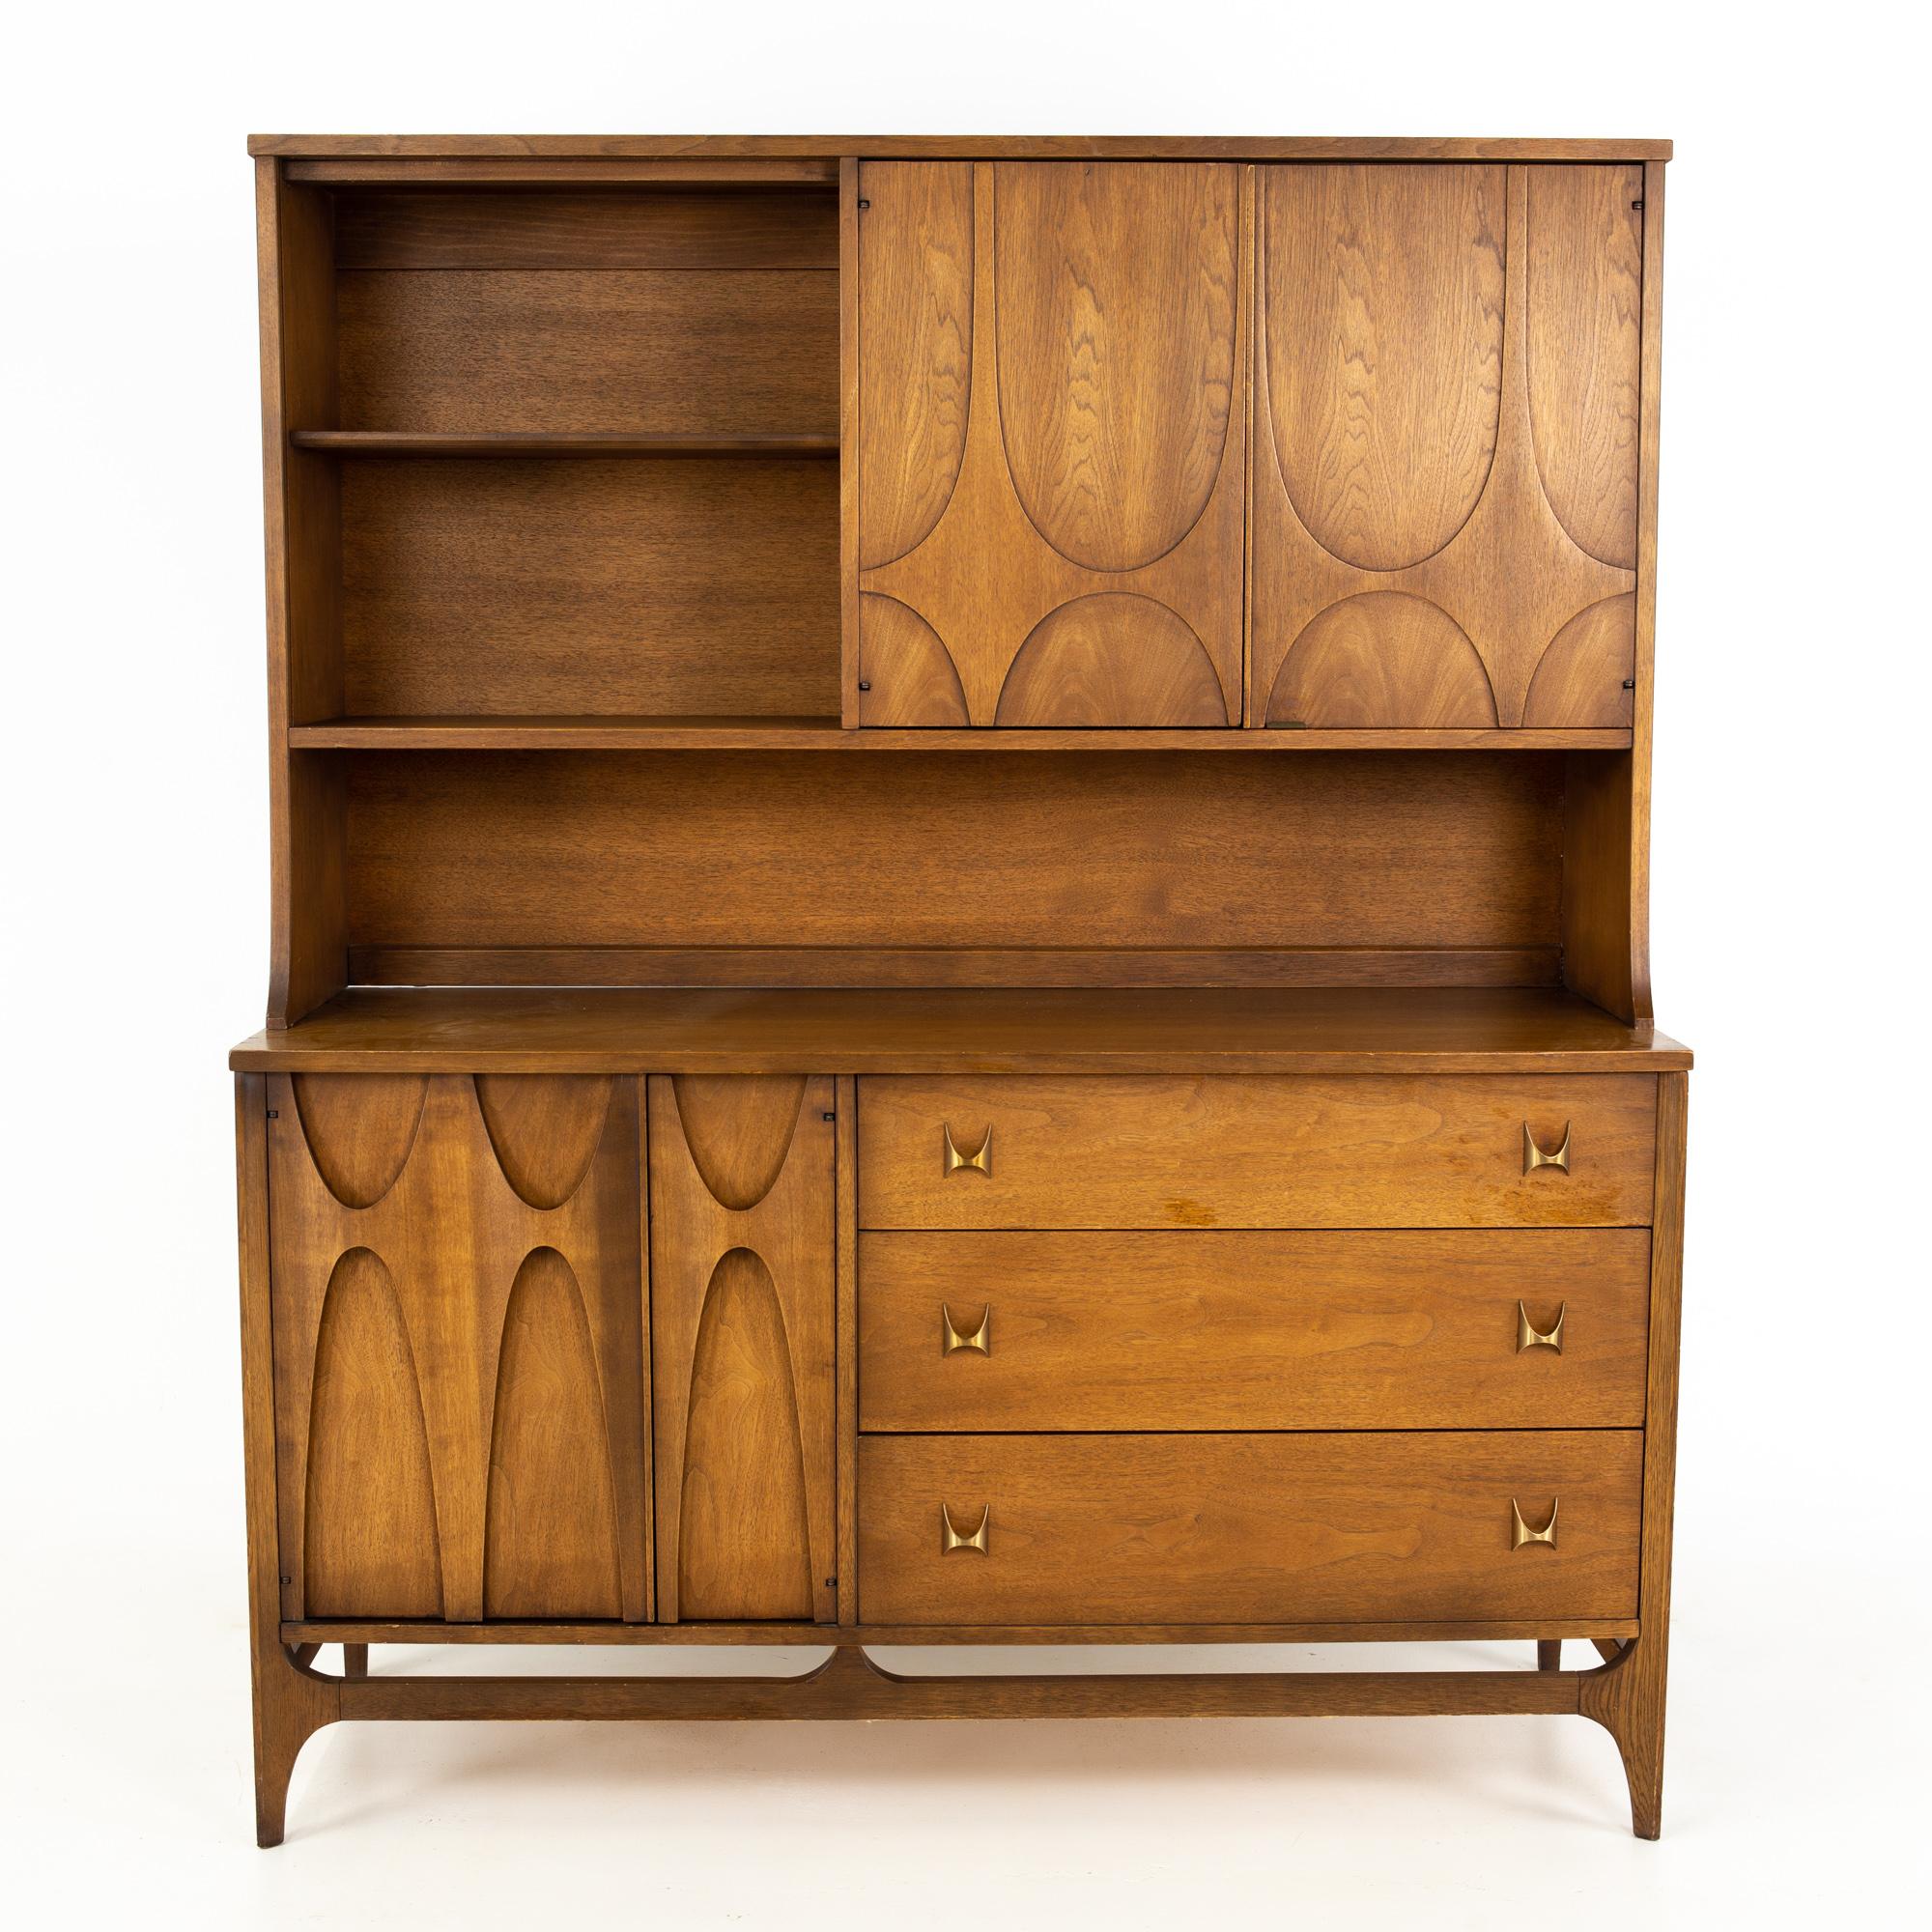 Broyhill Brasilia Brutalist mid century walnut sideboard credenza buffet and hutch
Buffet and hutch measures: 54 wide x 19 deep x 65 inches high

All pieces of furniture can be had in what we call restored vintage condition. That means the piece